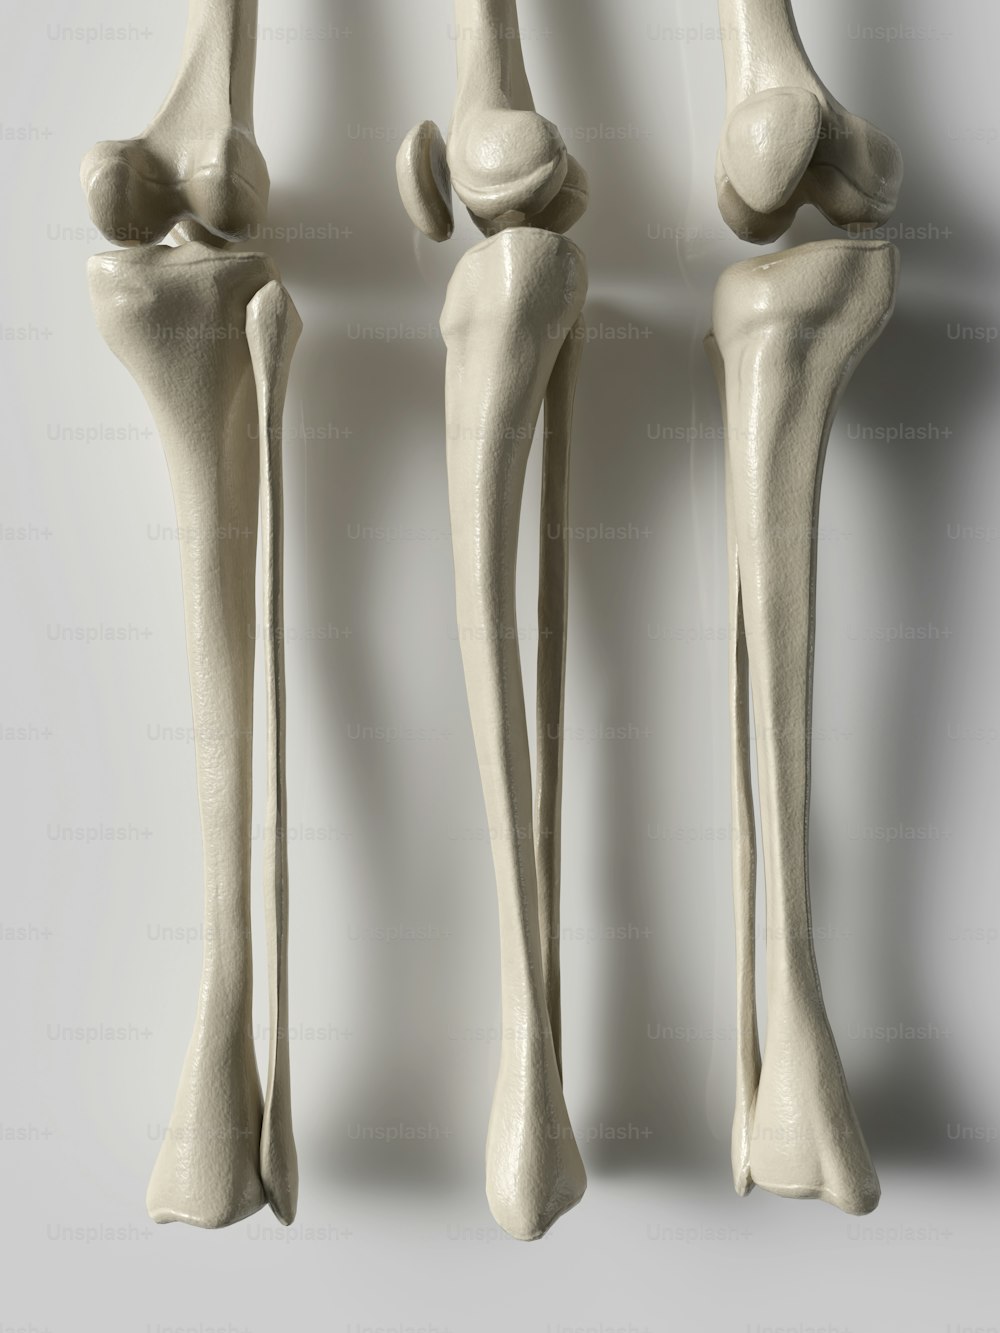 three different views of the bones of a human